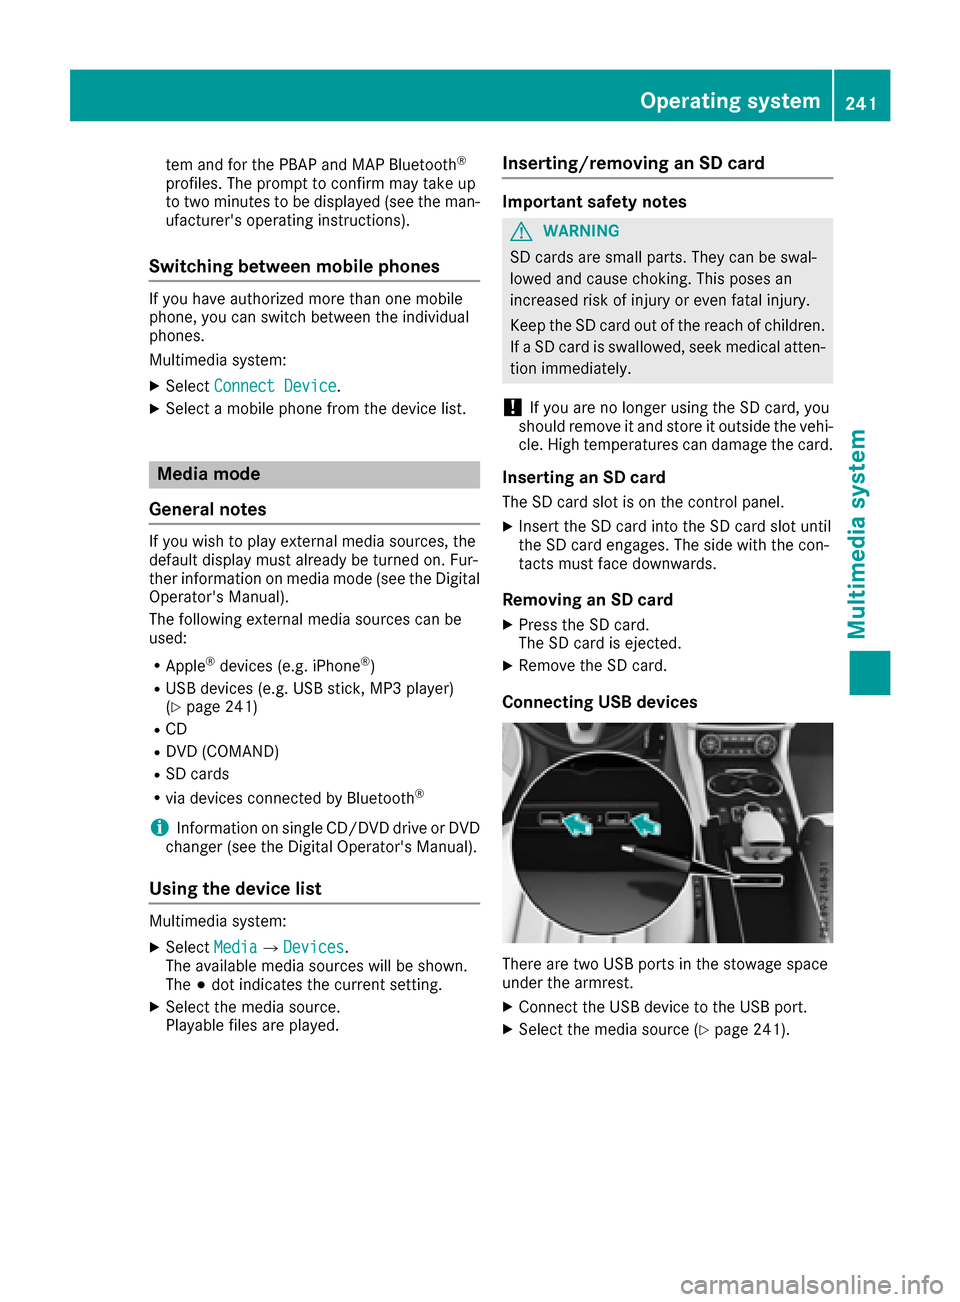 MERCEDES-BENZ CLS-Class 2017 W218 User Guide tem and for the PBAP and MAP Bluetooth®
profiles. The prompt to confirm may take up
to two minutes to be displayed (see the man-
ufacturers operating instructions).
Switching between mobile phones
I